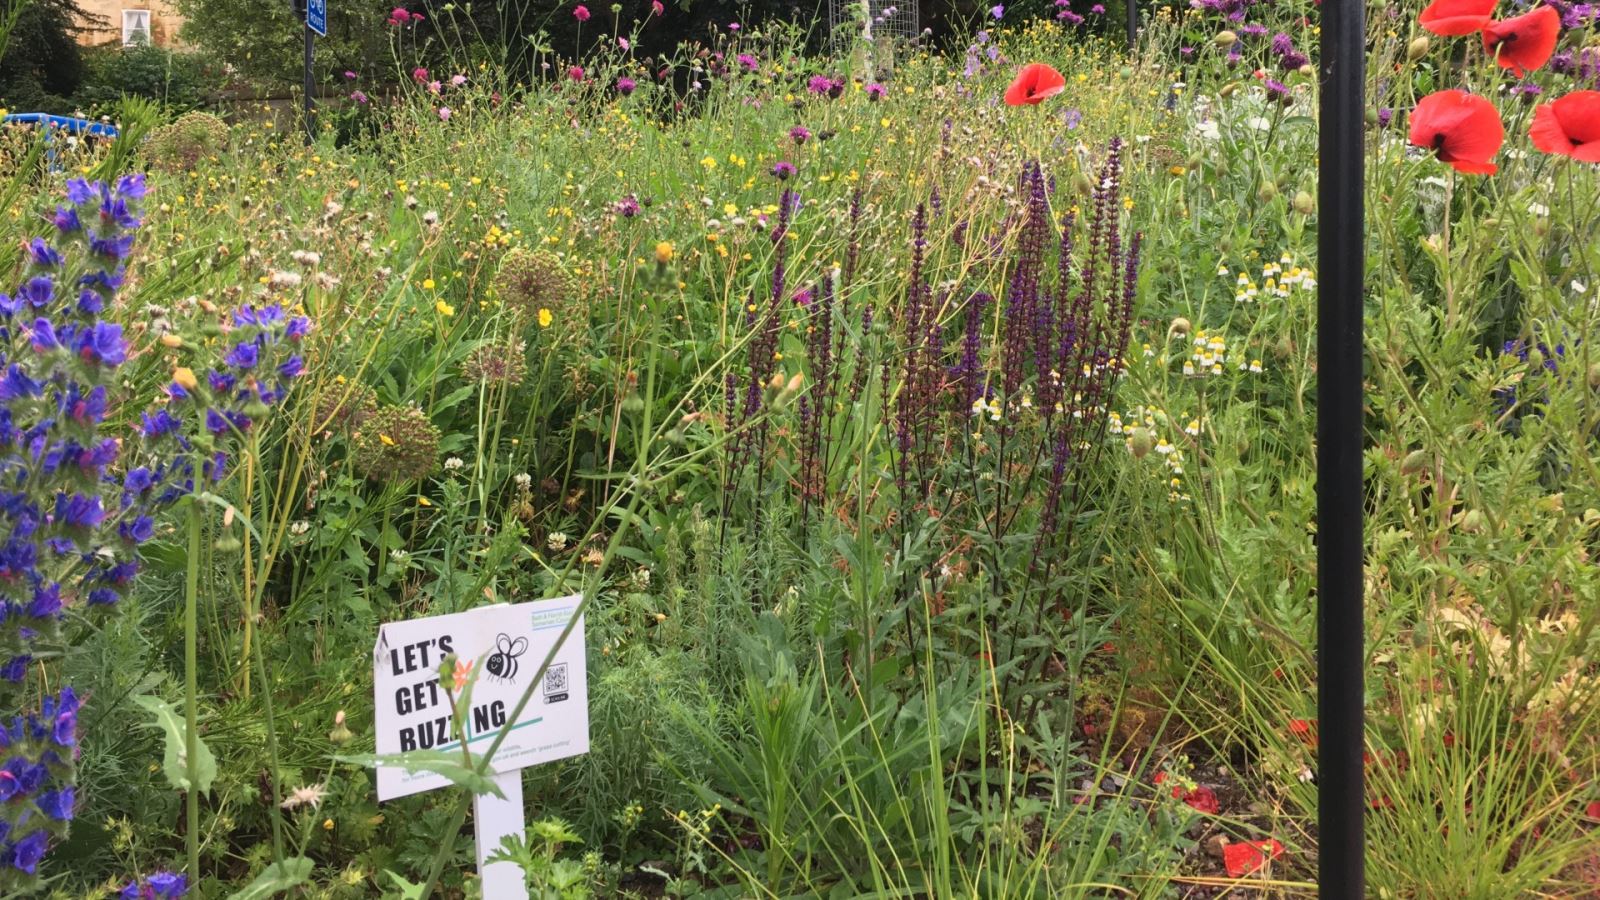 Let's Get Buzzing neighbourhood nature area already established in Widcombe High St, Bath, by volunteers.